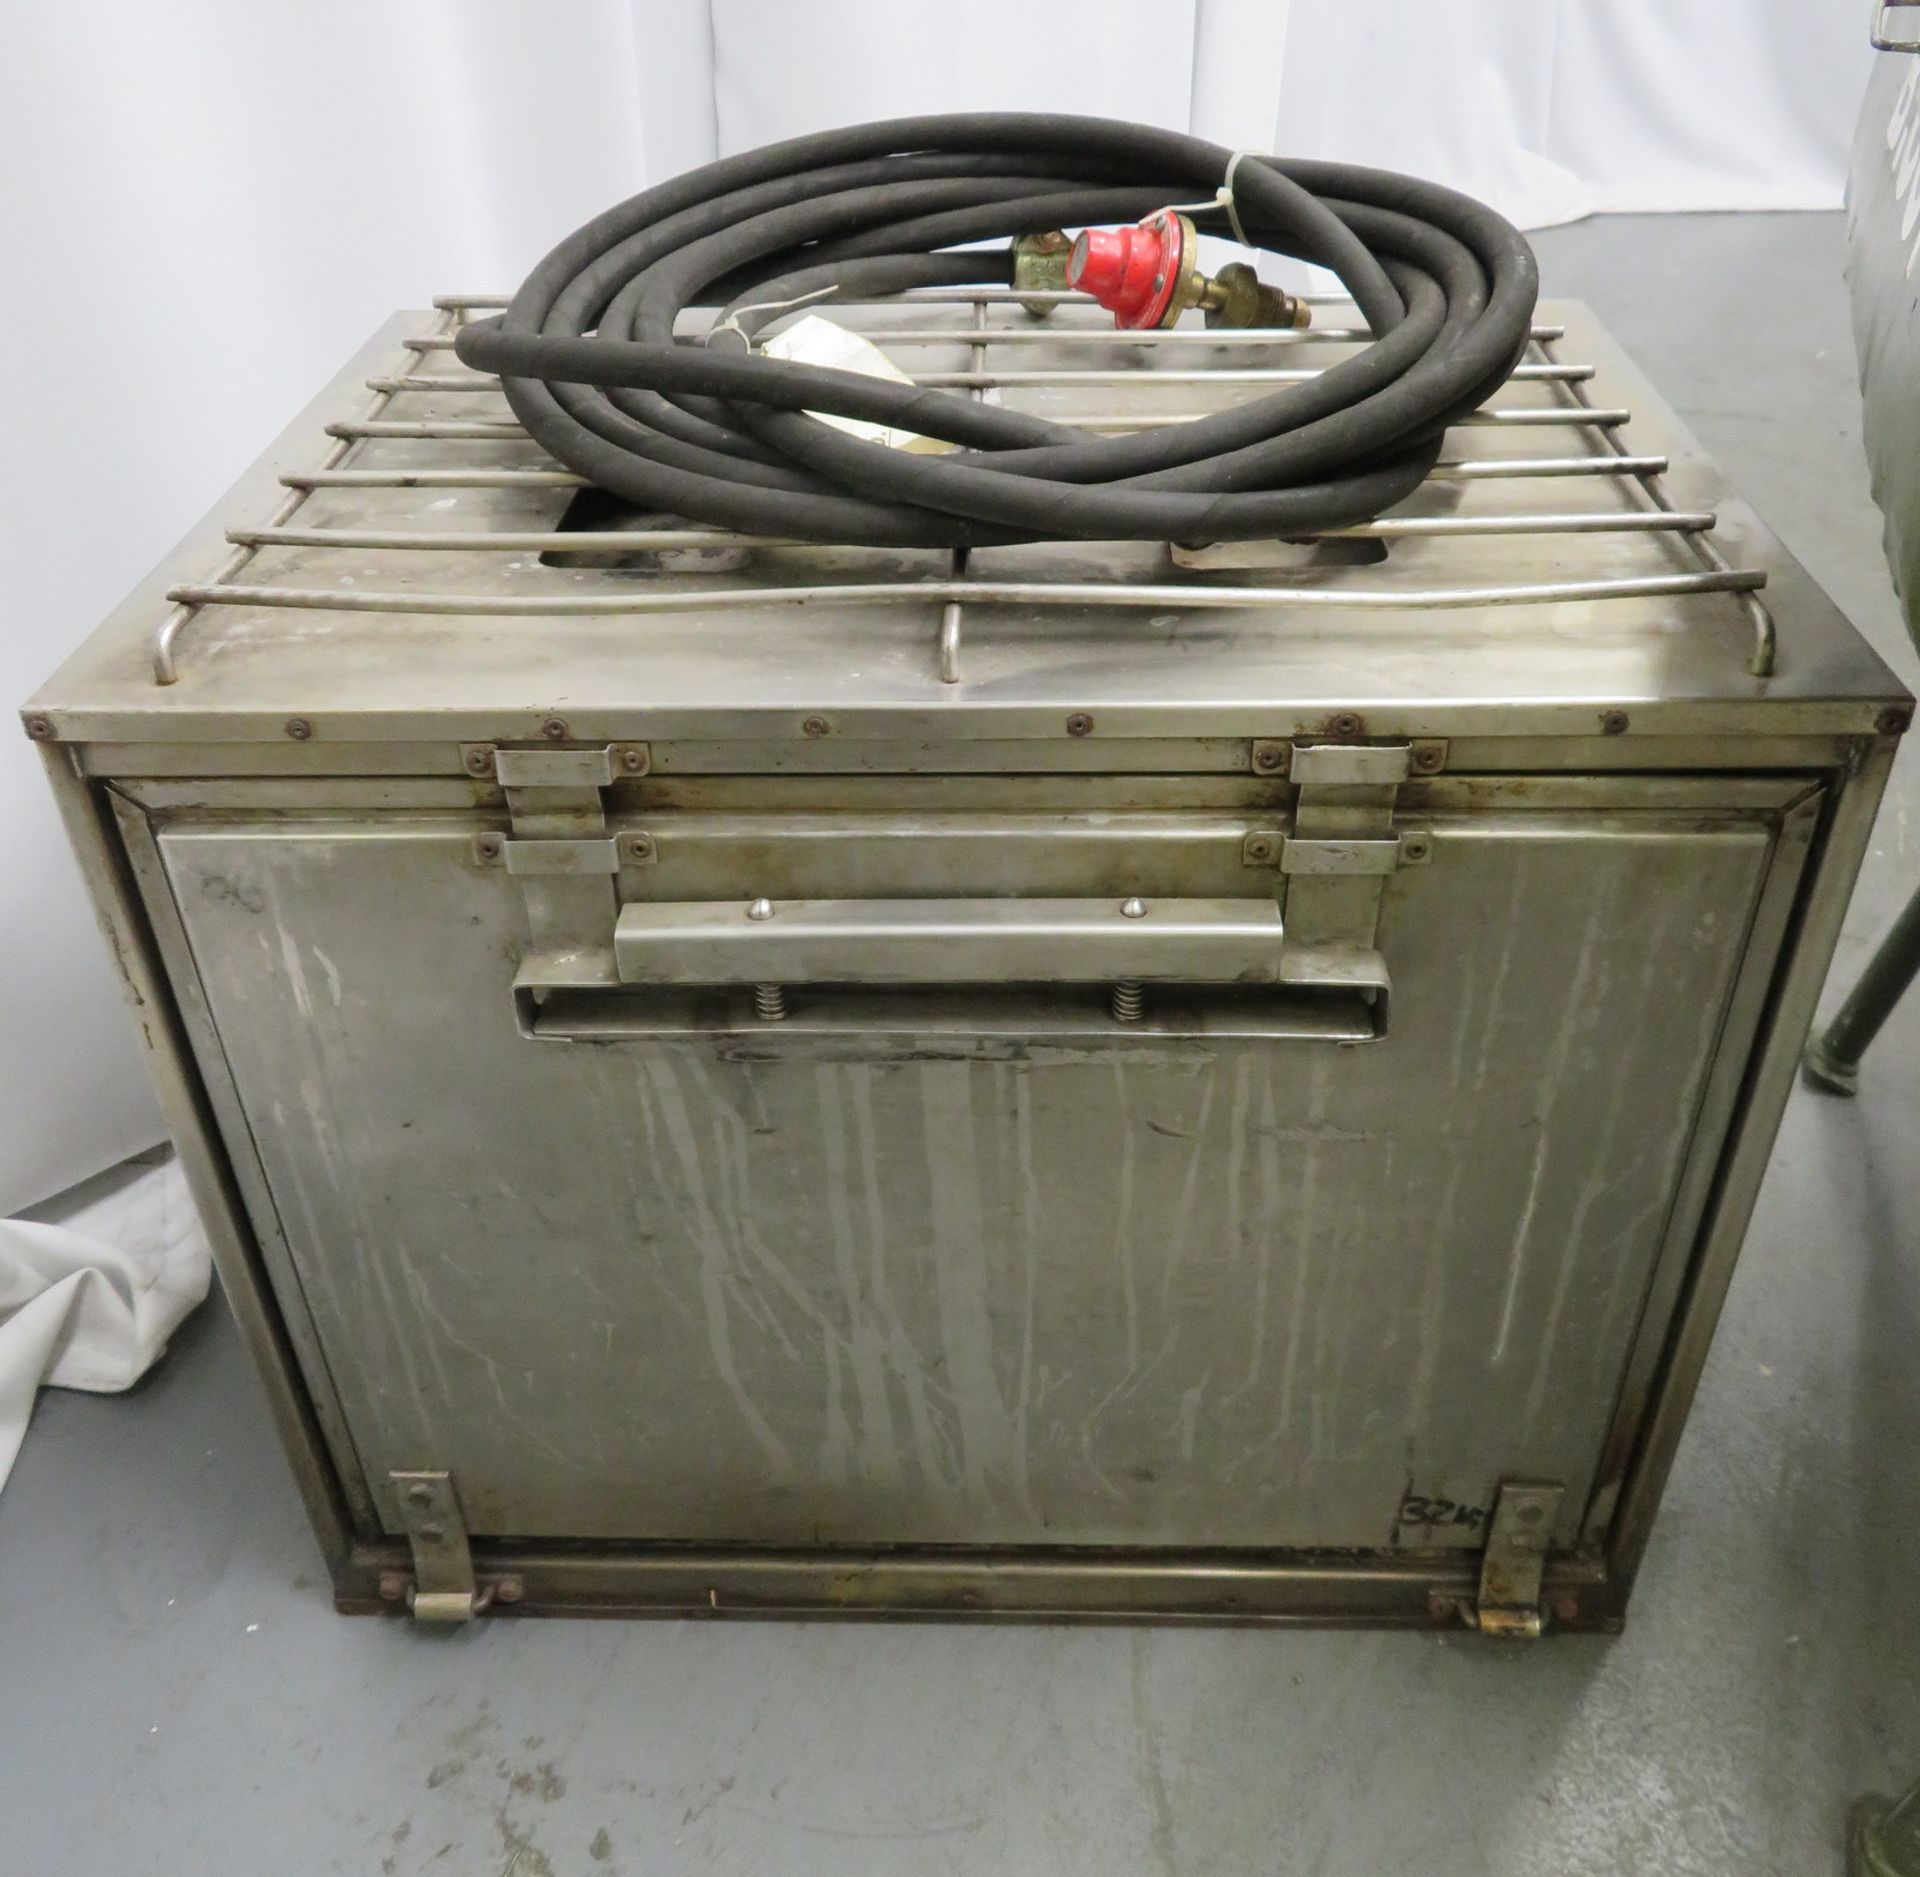 British Army No 5 field cooker & G1 No 5 hot box field oven set. - Image 6 of 16